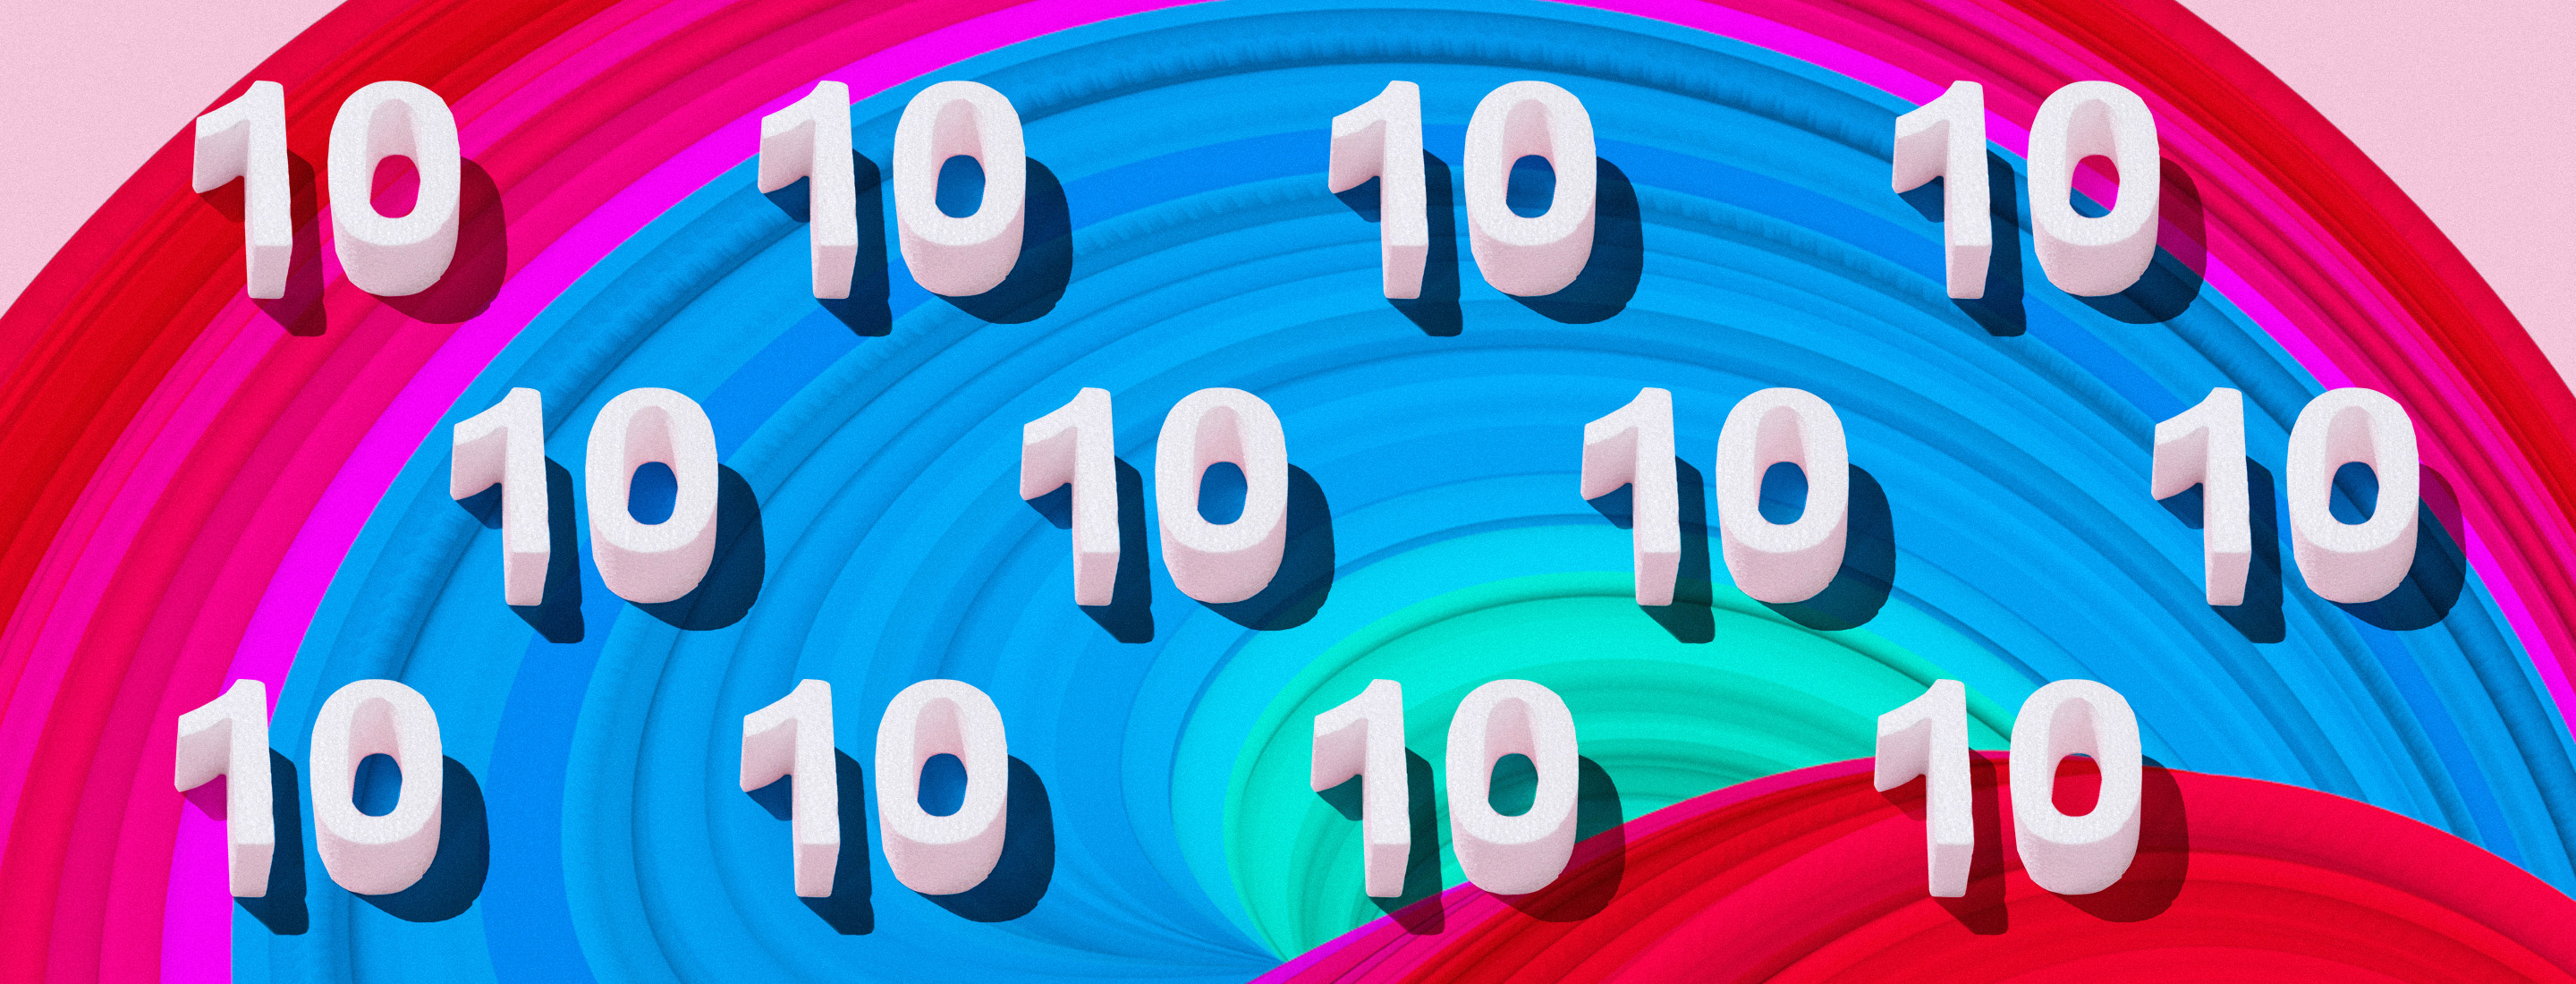 The number 10 repeated on a colorful background